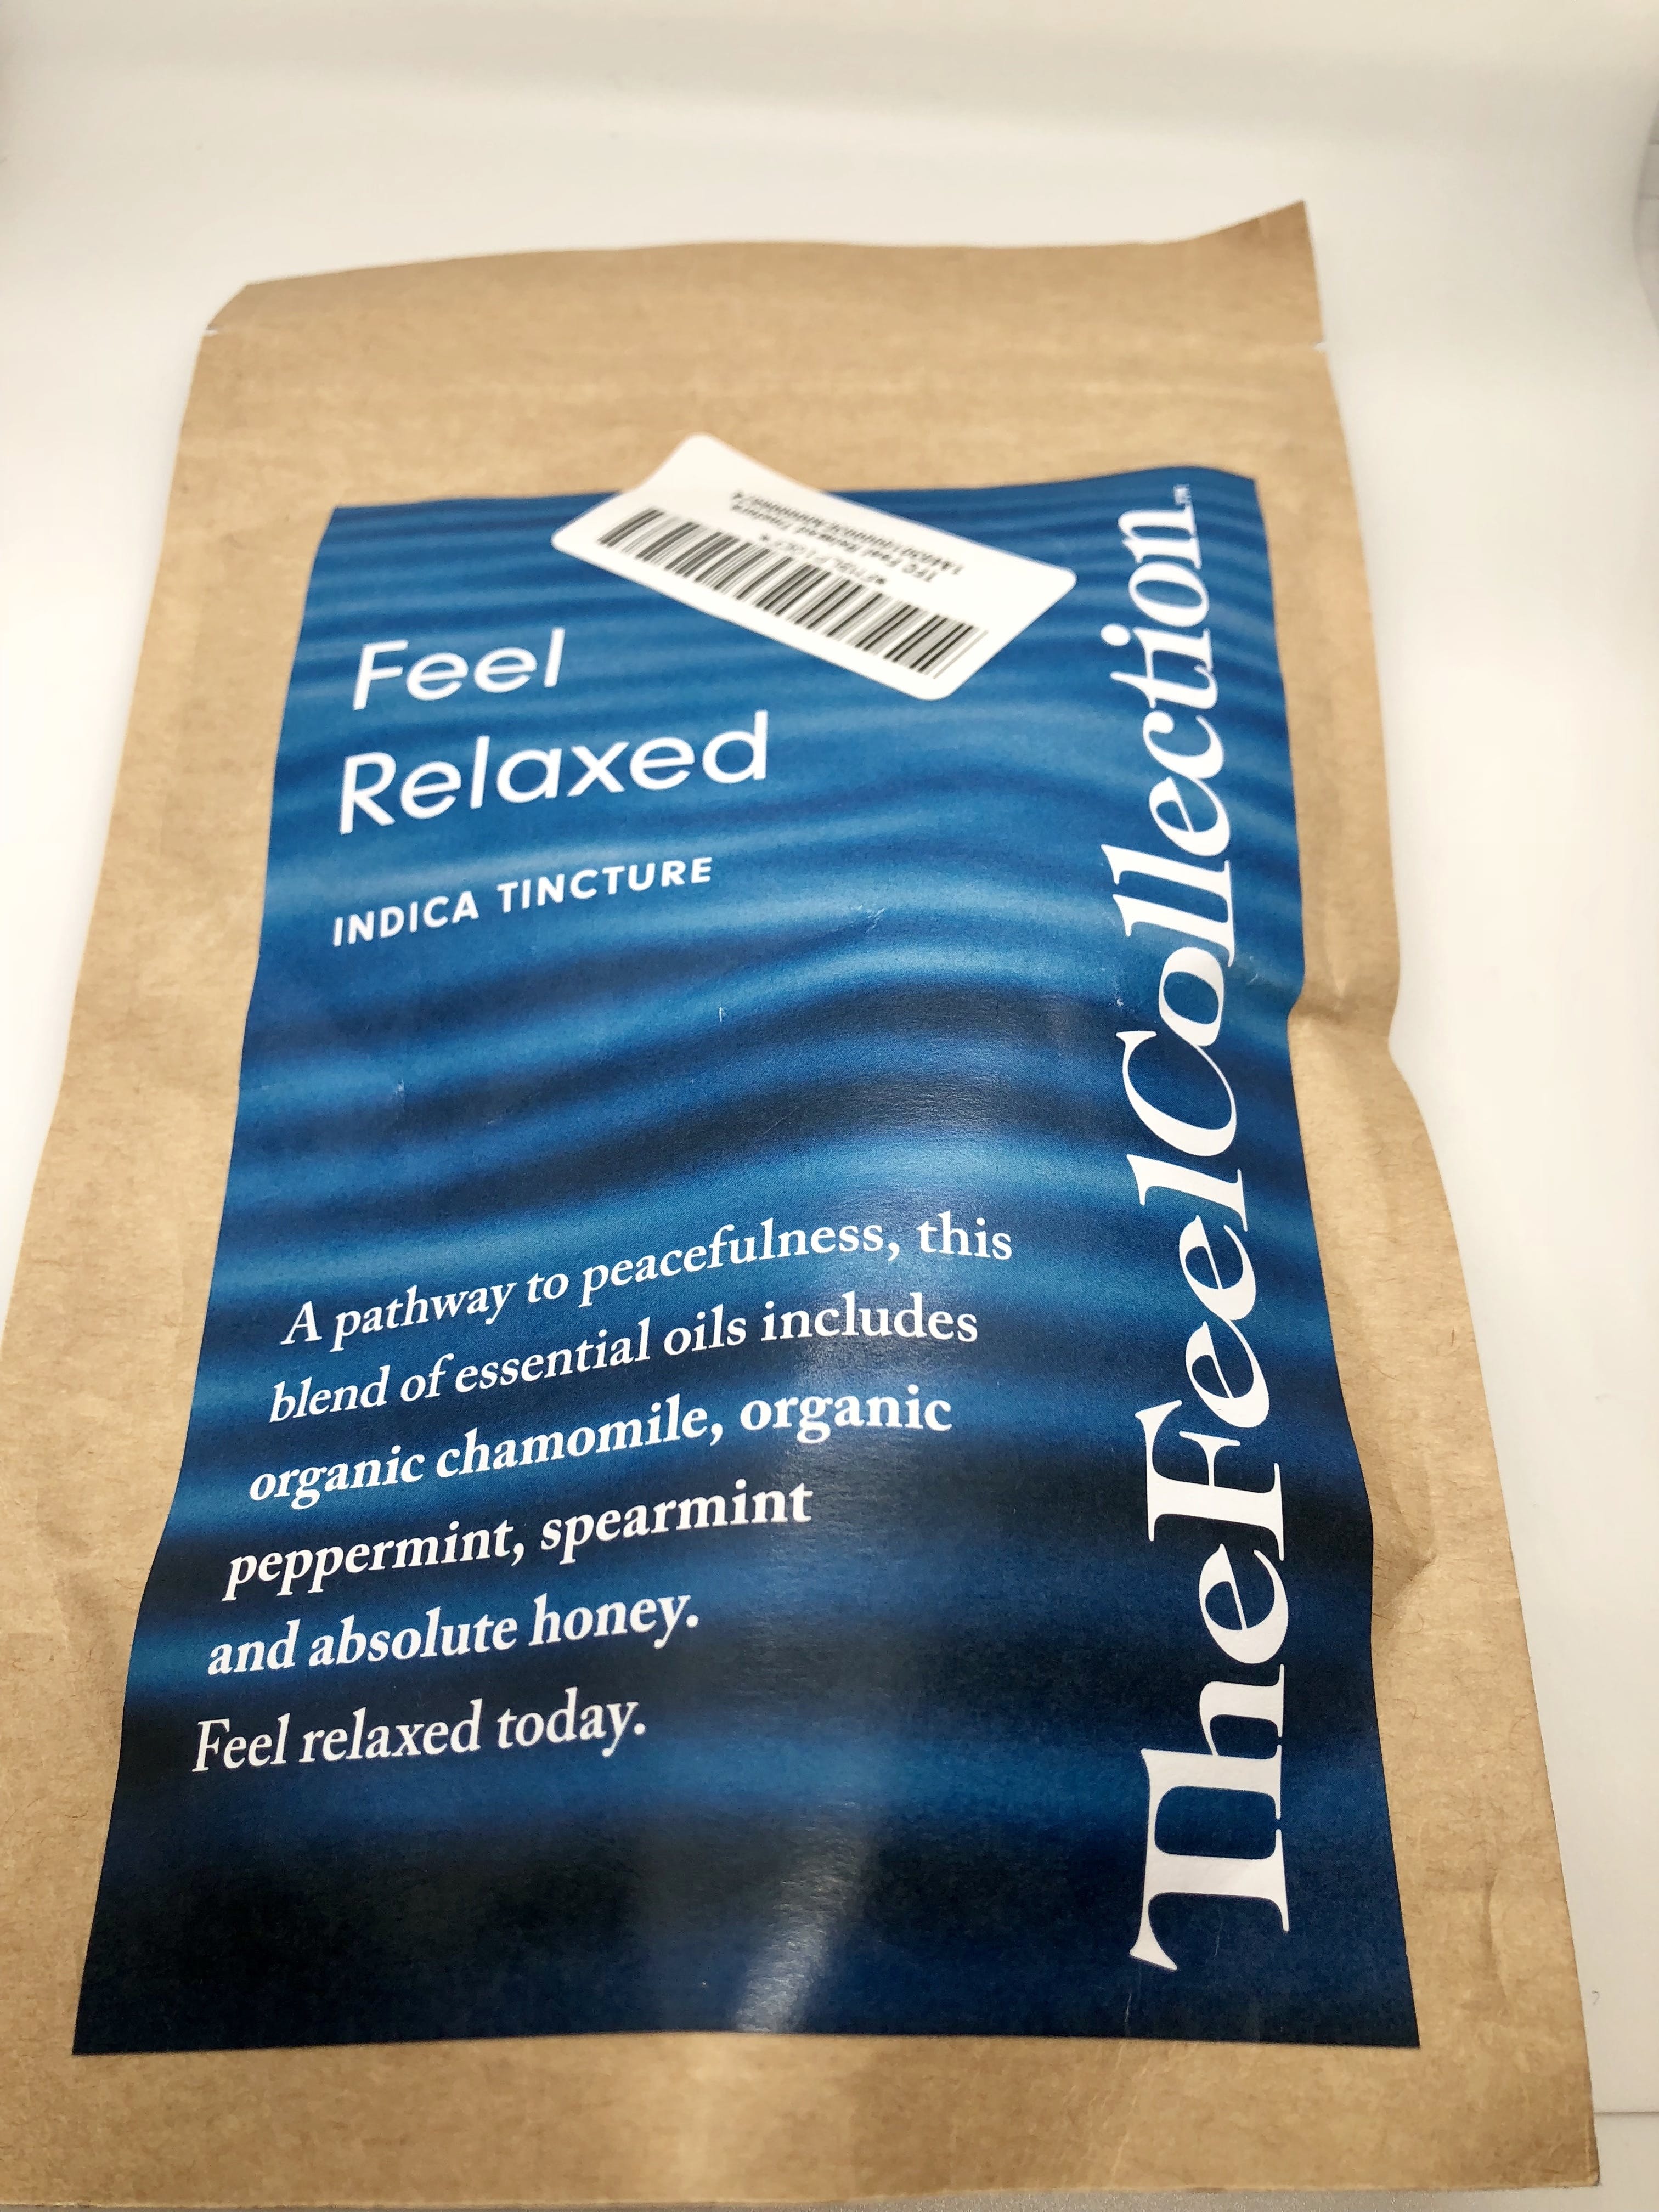 tincture-thefeelcollection-tfc-feel-relaxed-tincture